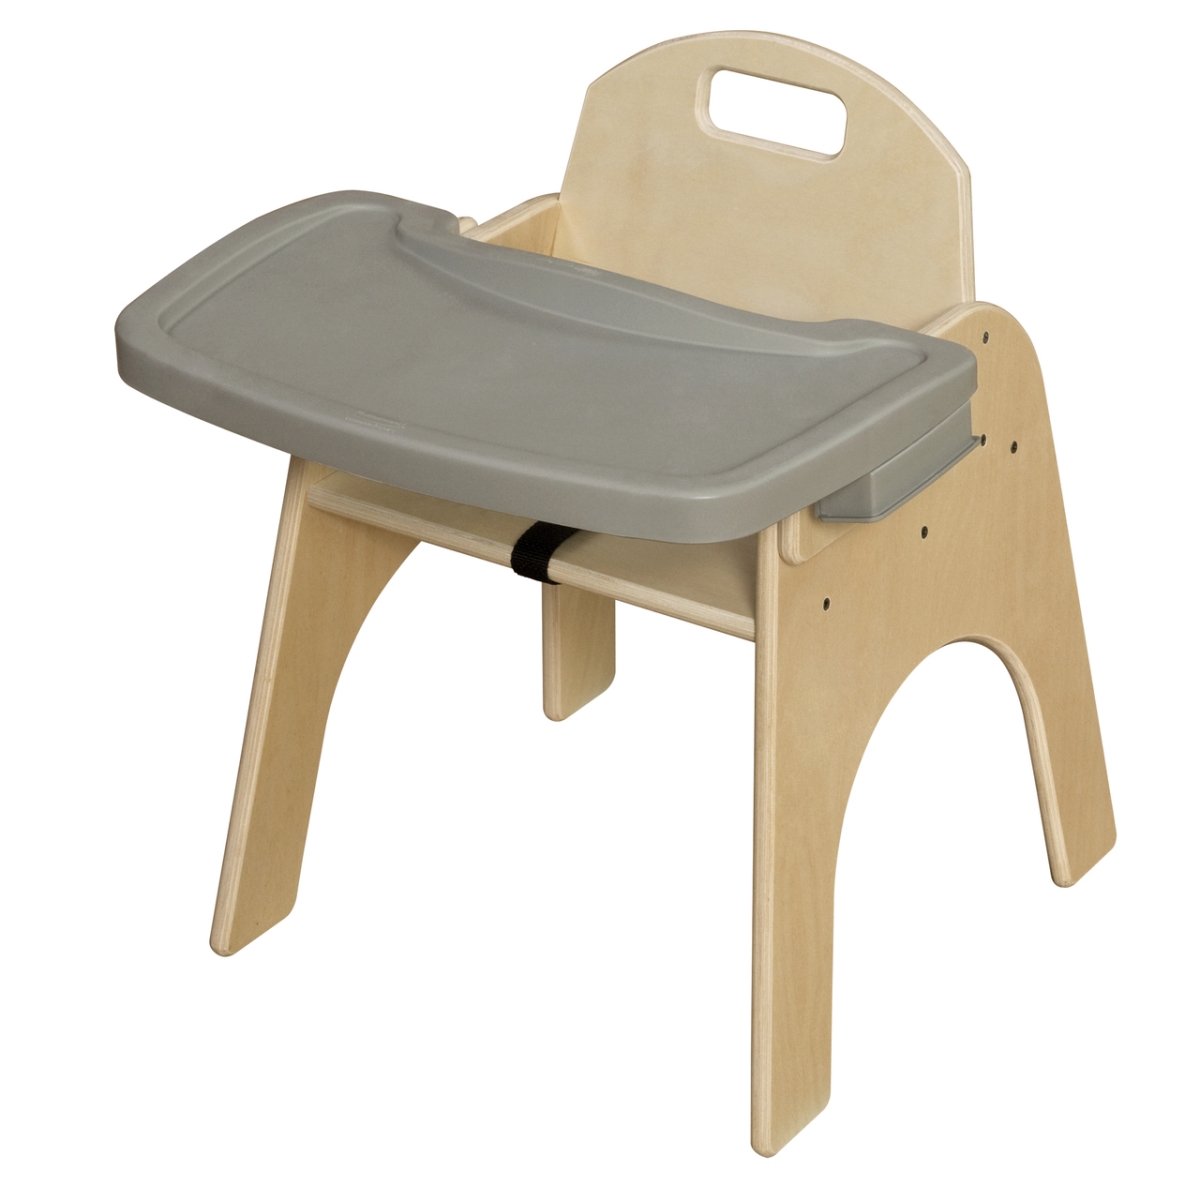 80130ts 13 In. Seat Height Woodie With Adjustable Tray